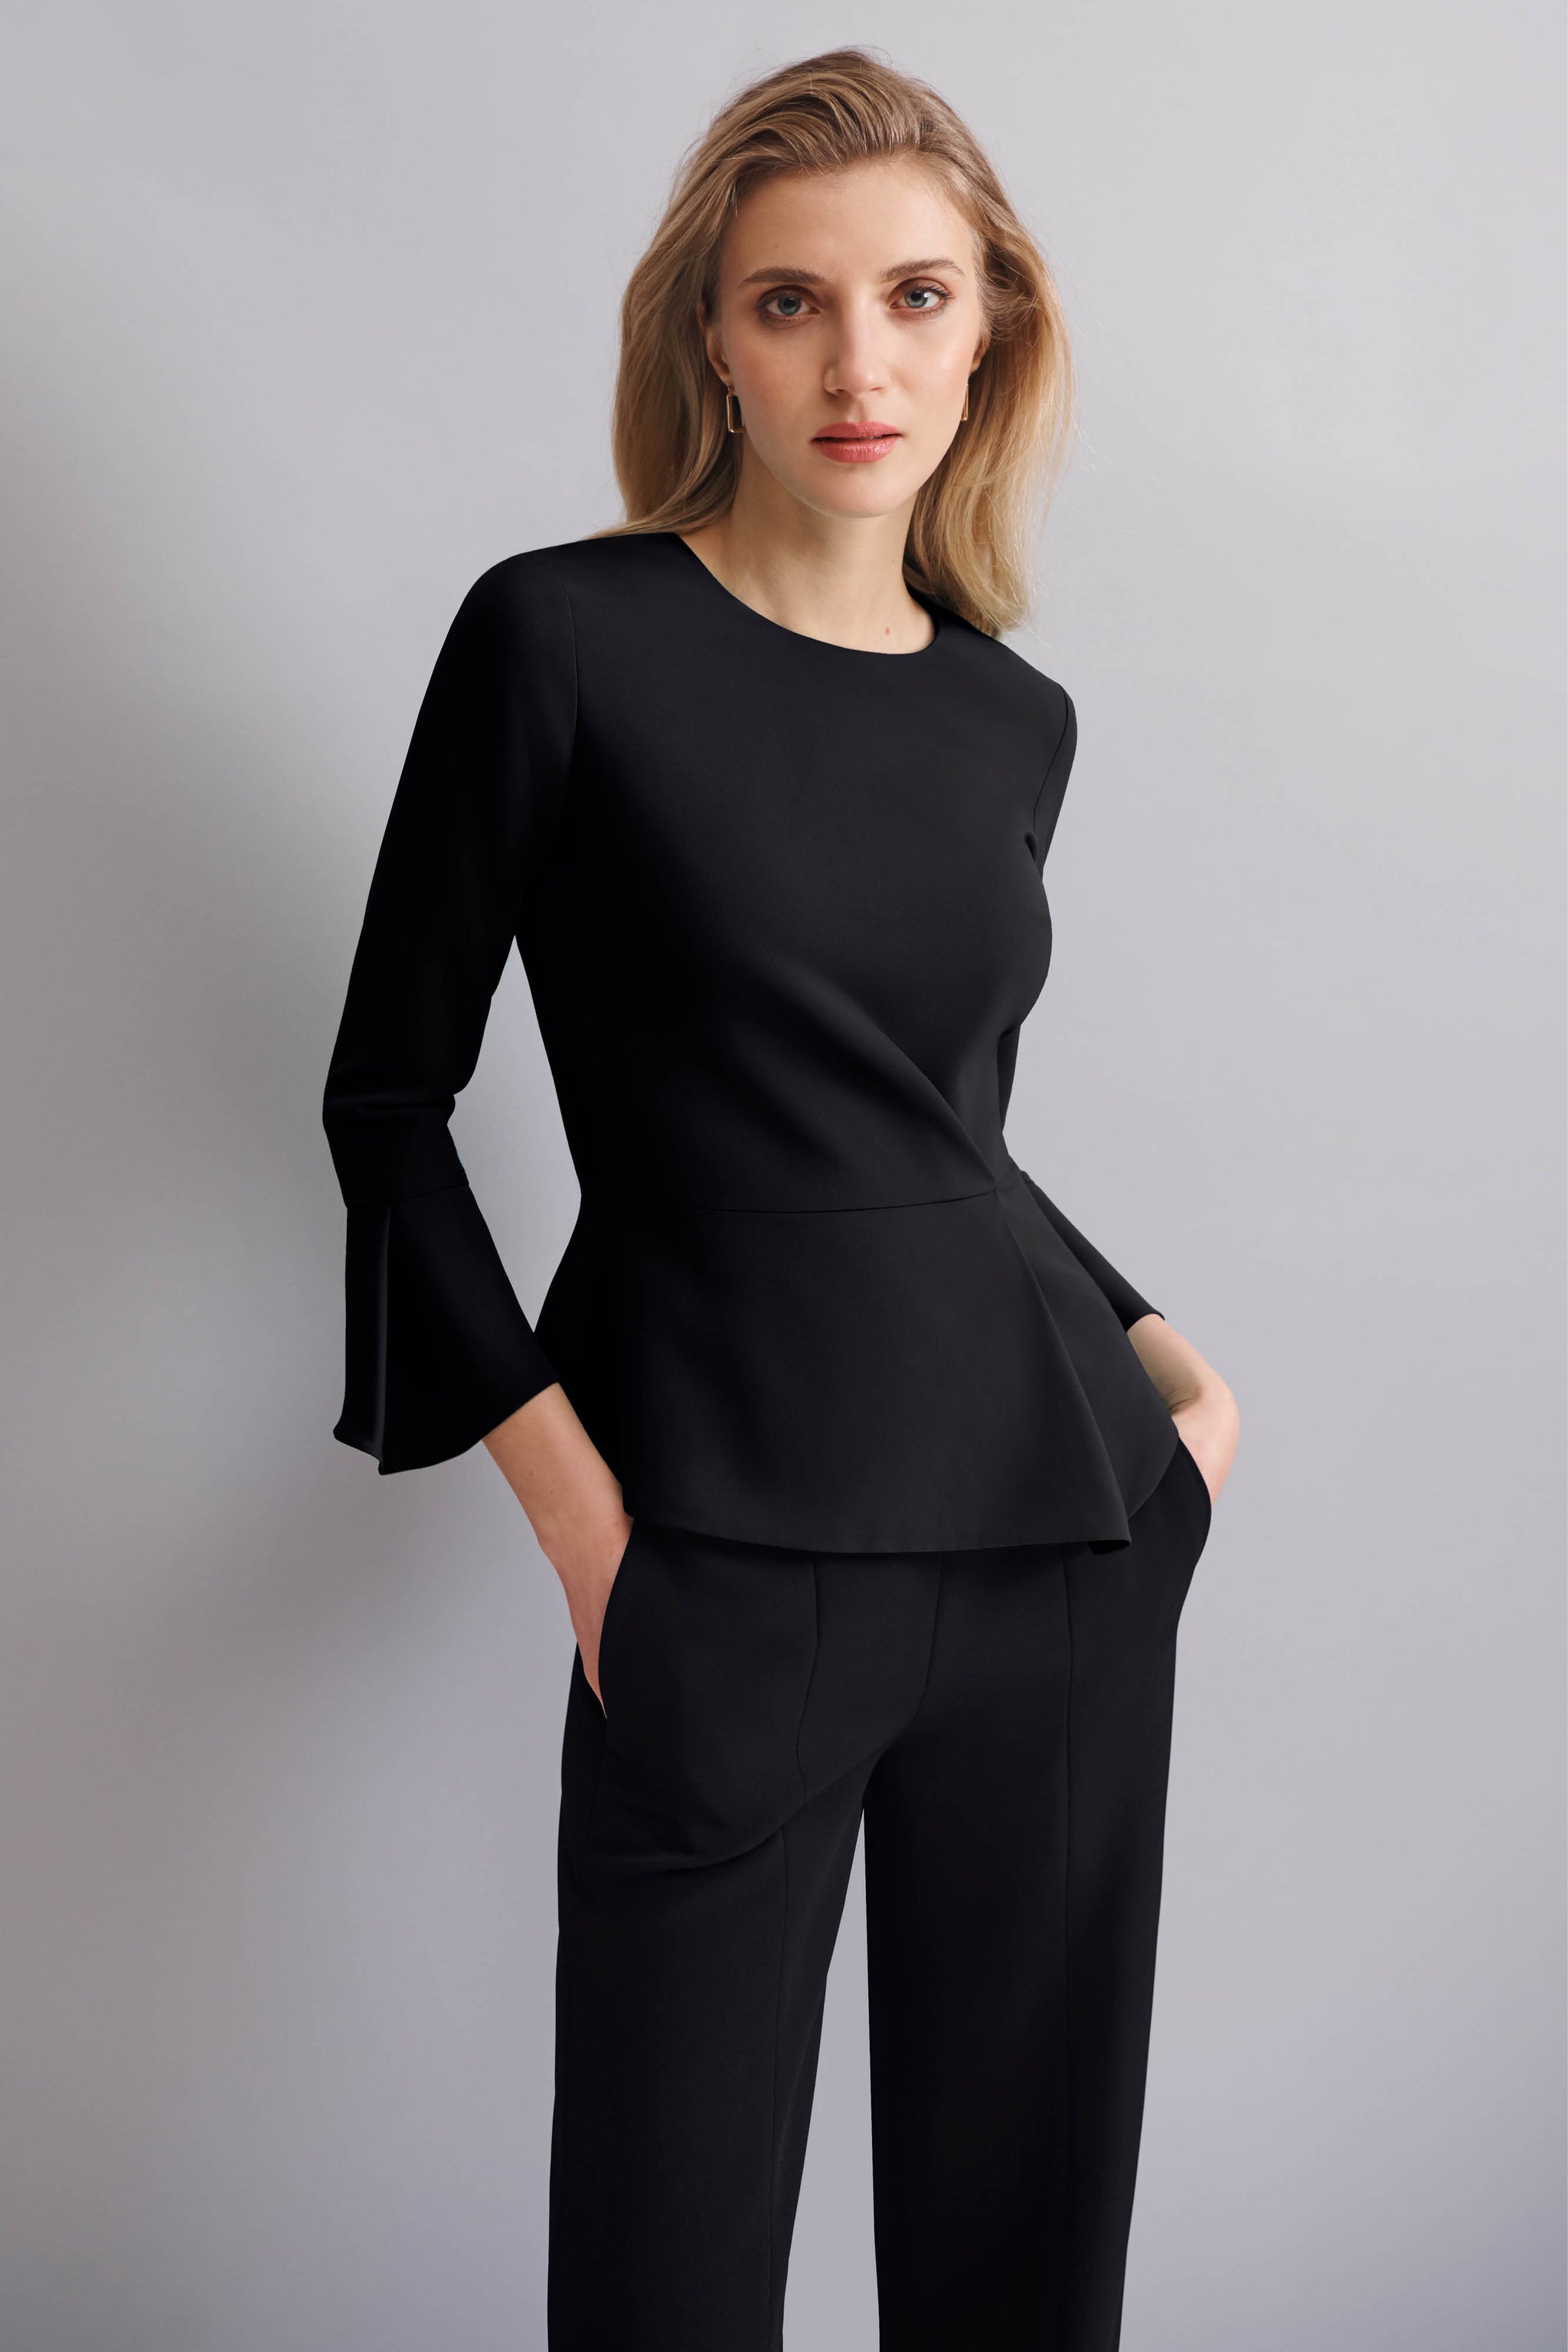 Chepstow Black Performance Tailoring Top